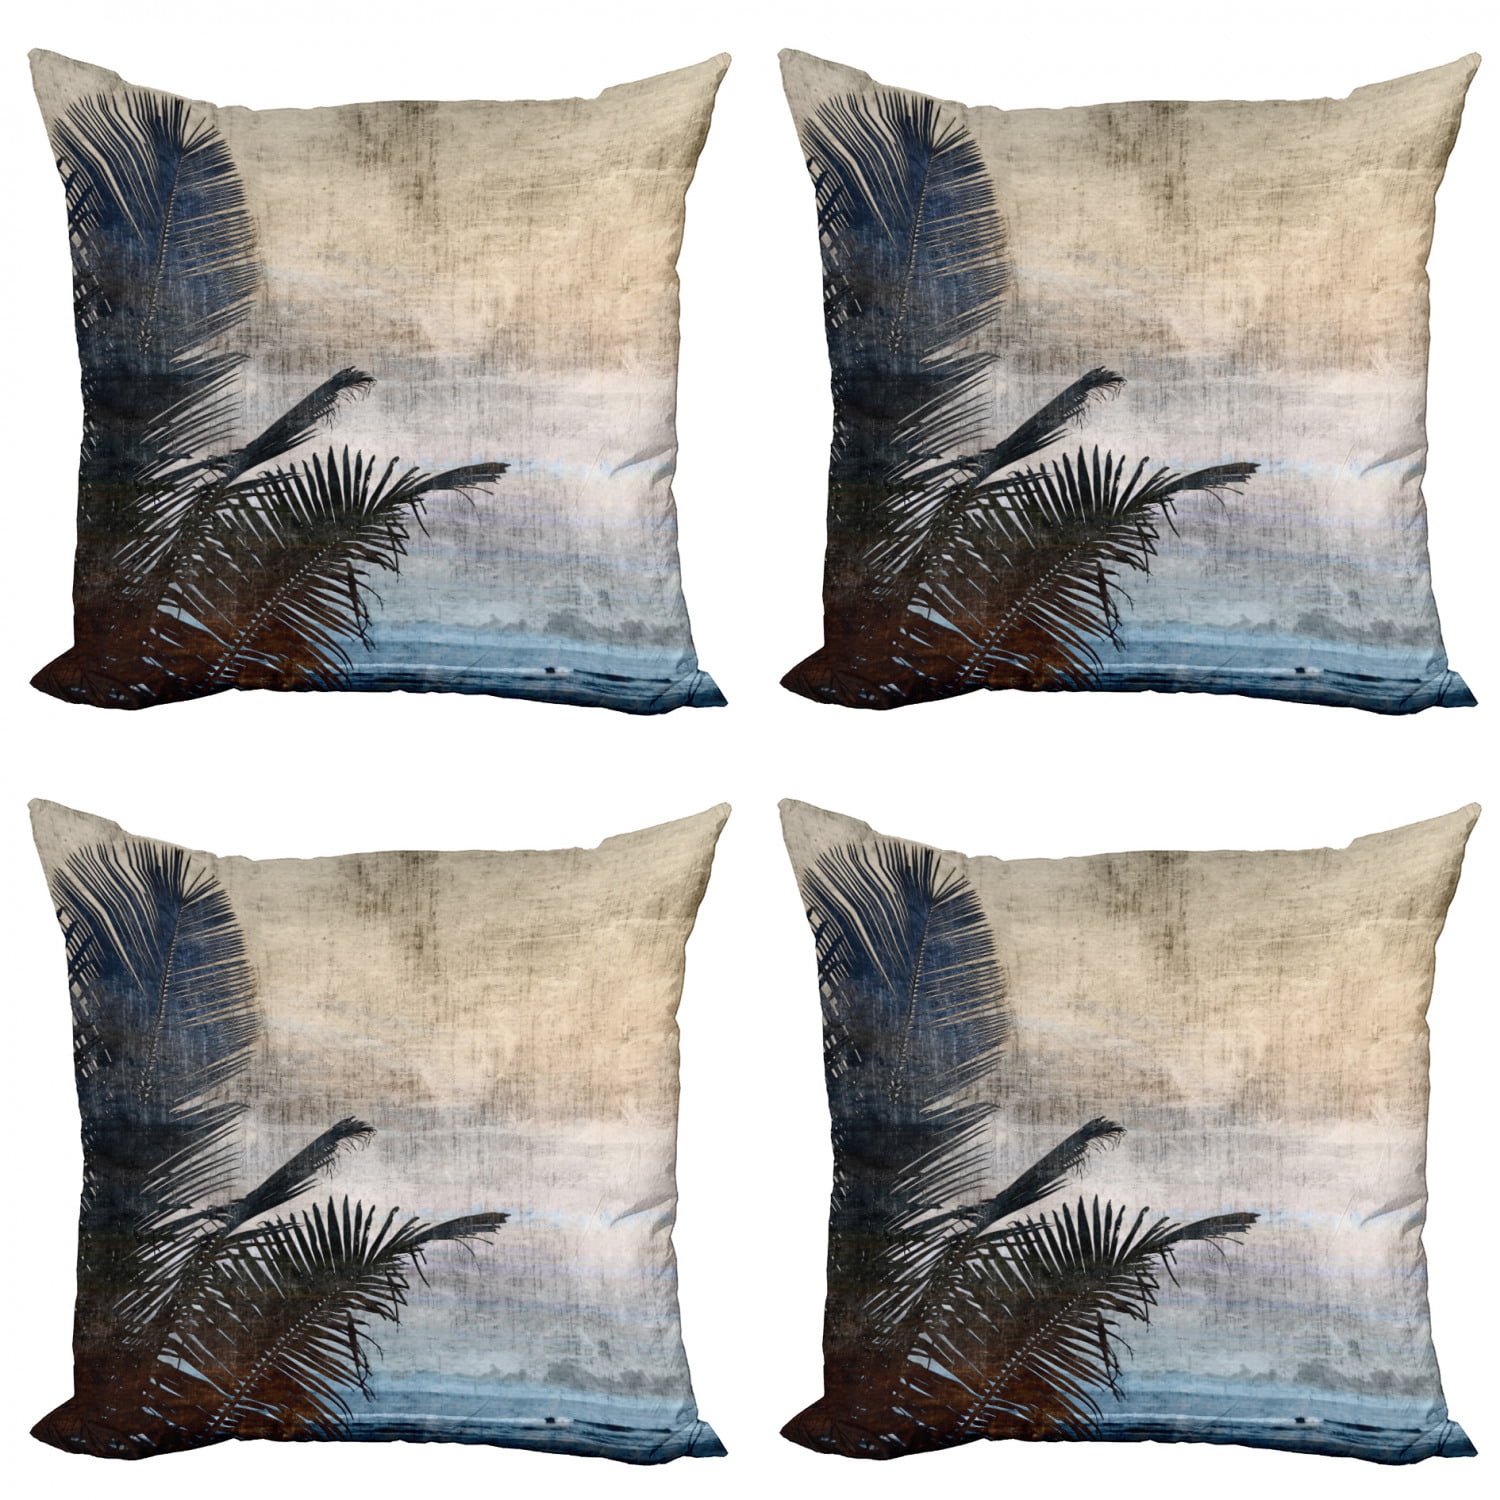 Ambesonne Hawaiian Throw Pillow Cushion Cover 16 X 16 Inches Palm Tree Leaves on Grunge Background with Sea Vintage Waterscape Illustration Beige Navy Decorative Square Accent Pillow Case 